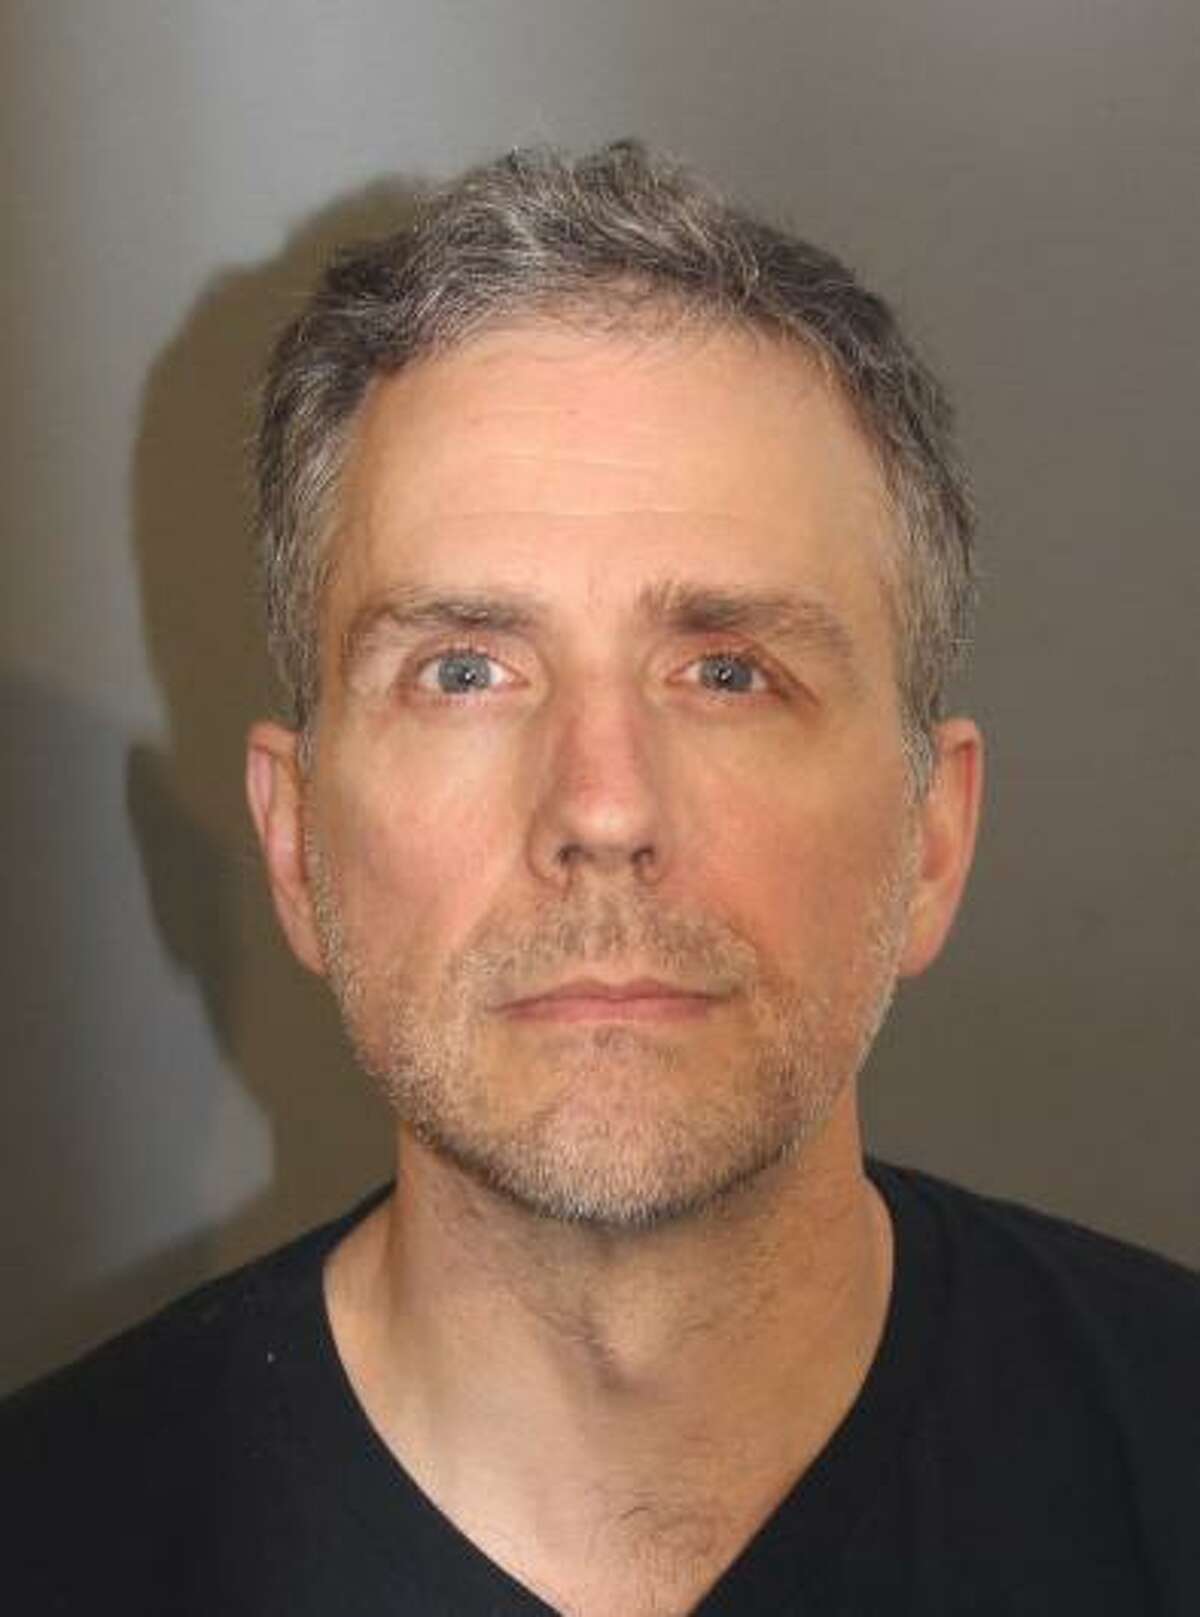 Kenneth Gardner, 51, was arrested by Danbury police May 31, 2022, on sexual assault and other charges. He resigned as a teacher at Broadview Middle School in February, about five months after an investigation into he and his wife began.